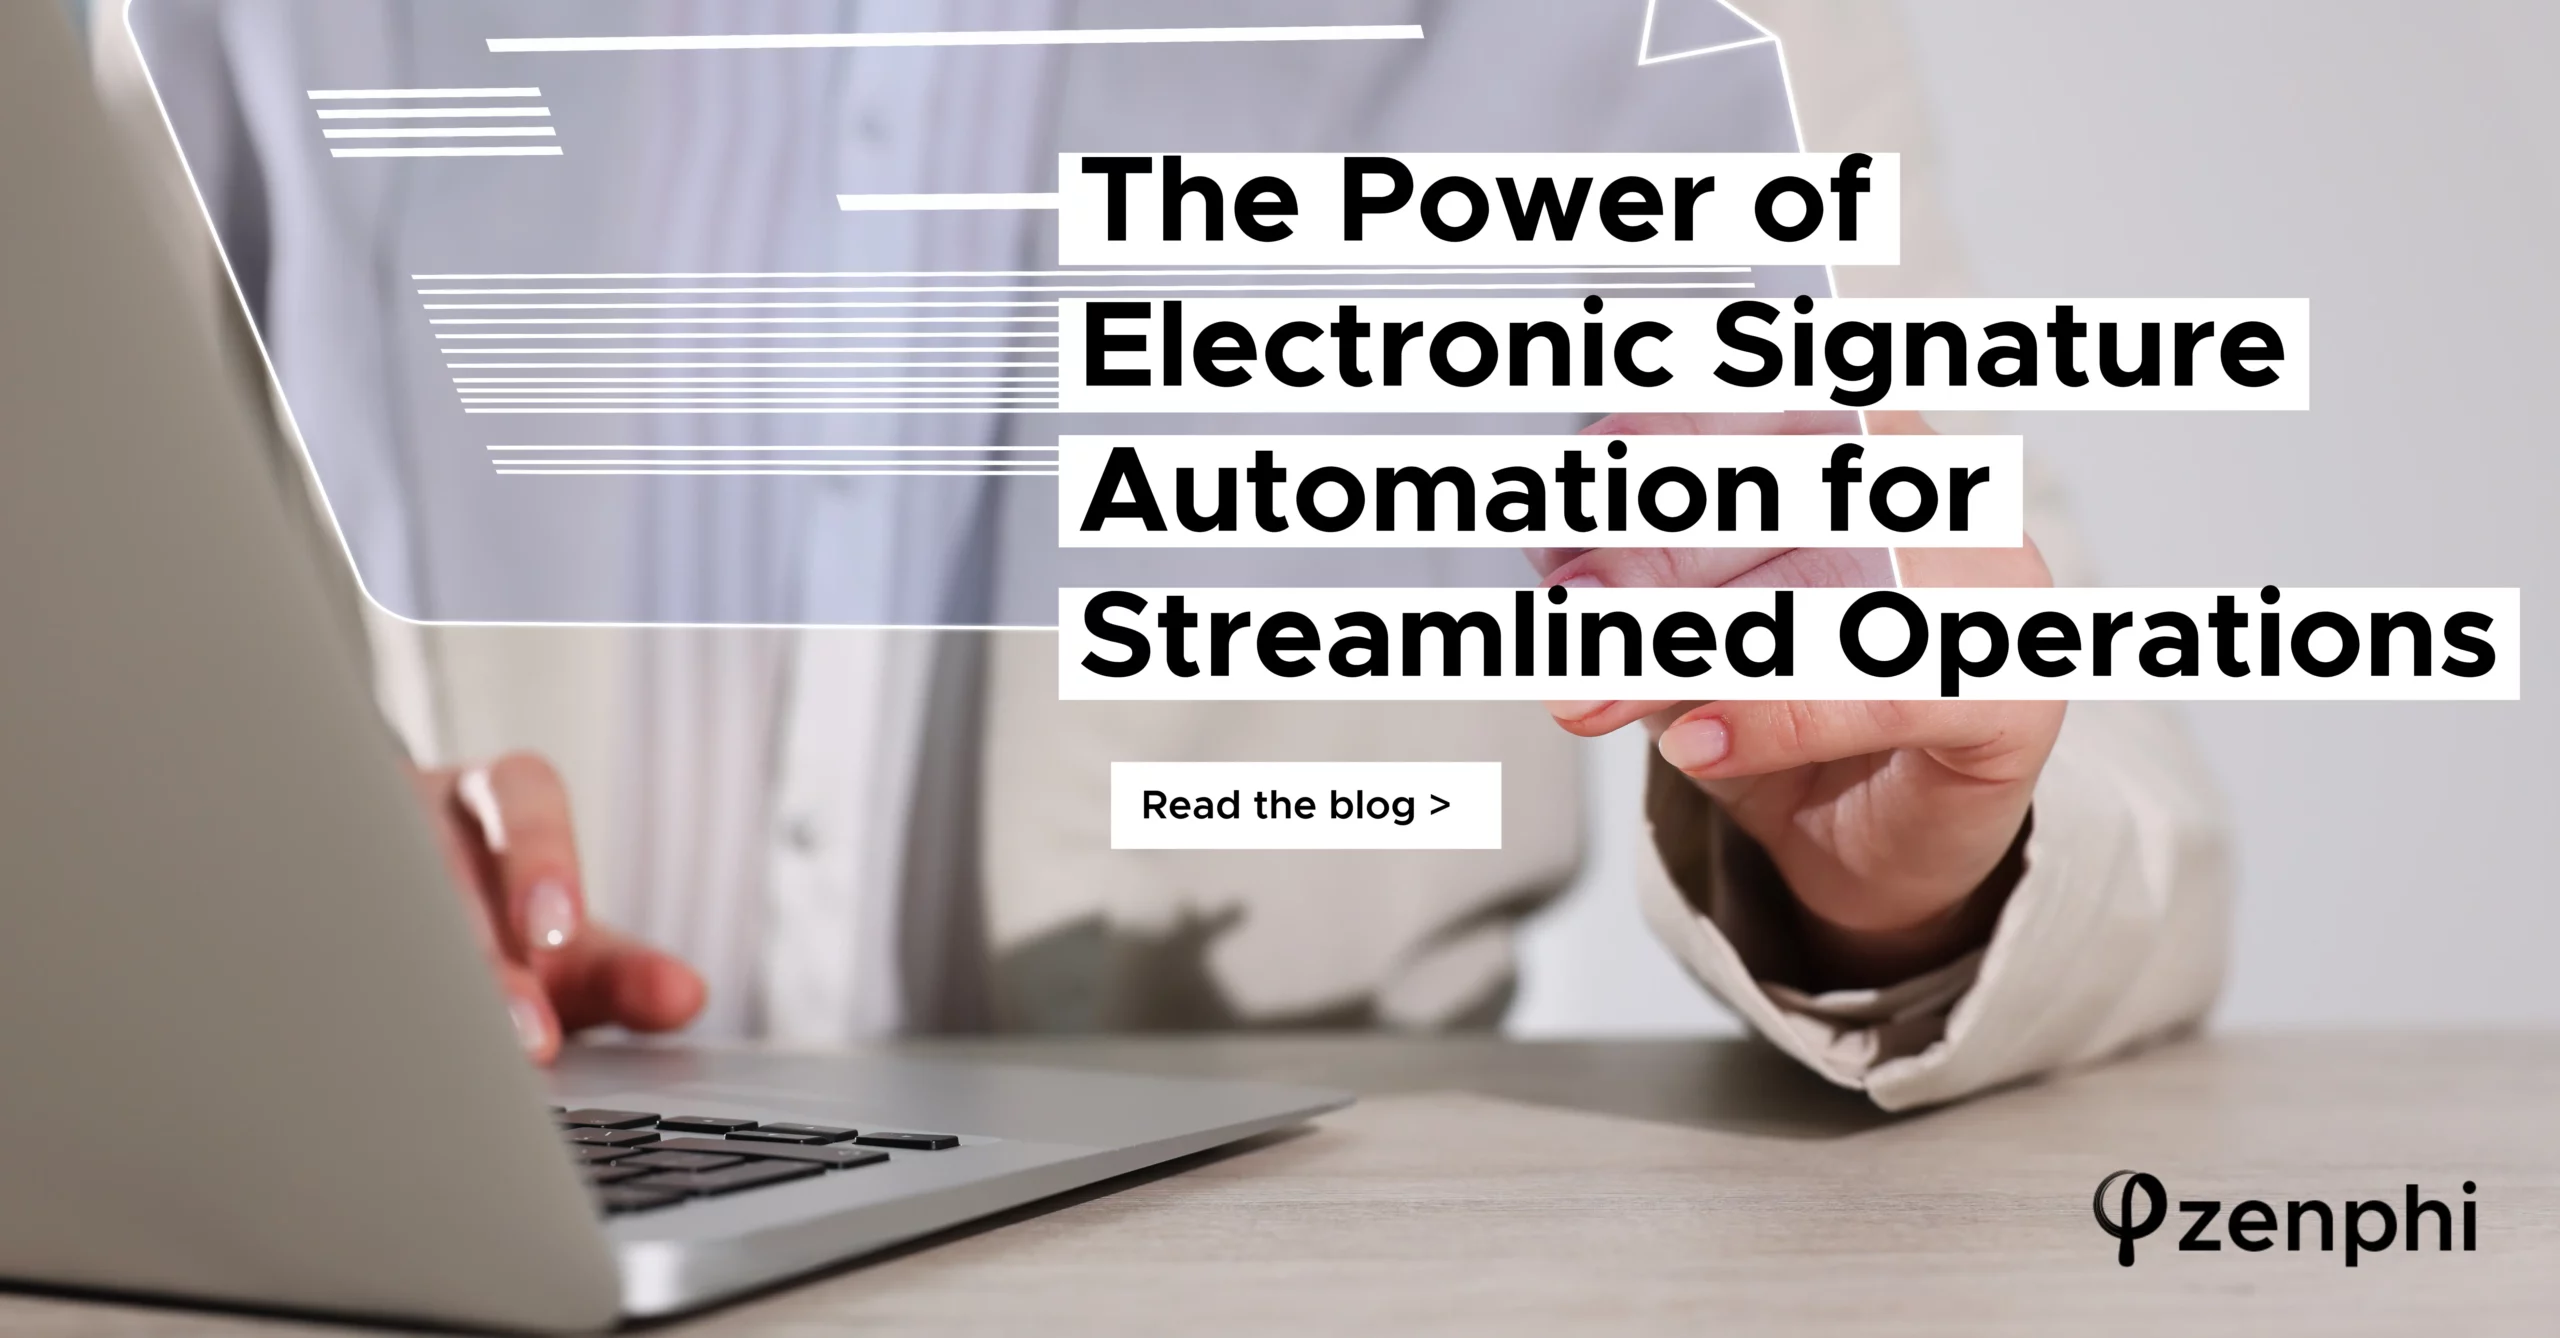 The power of electronic signature automation for streamlines operations